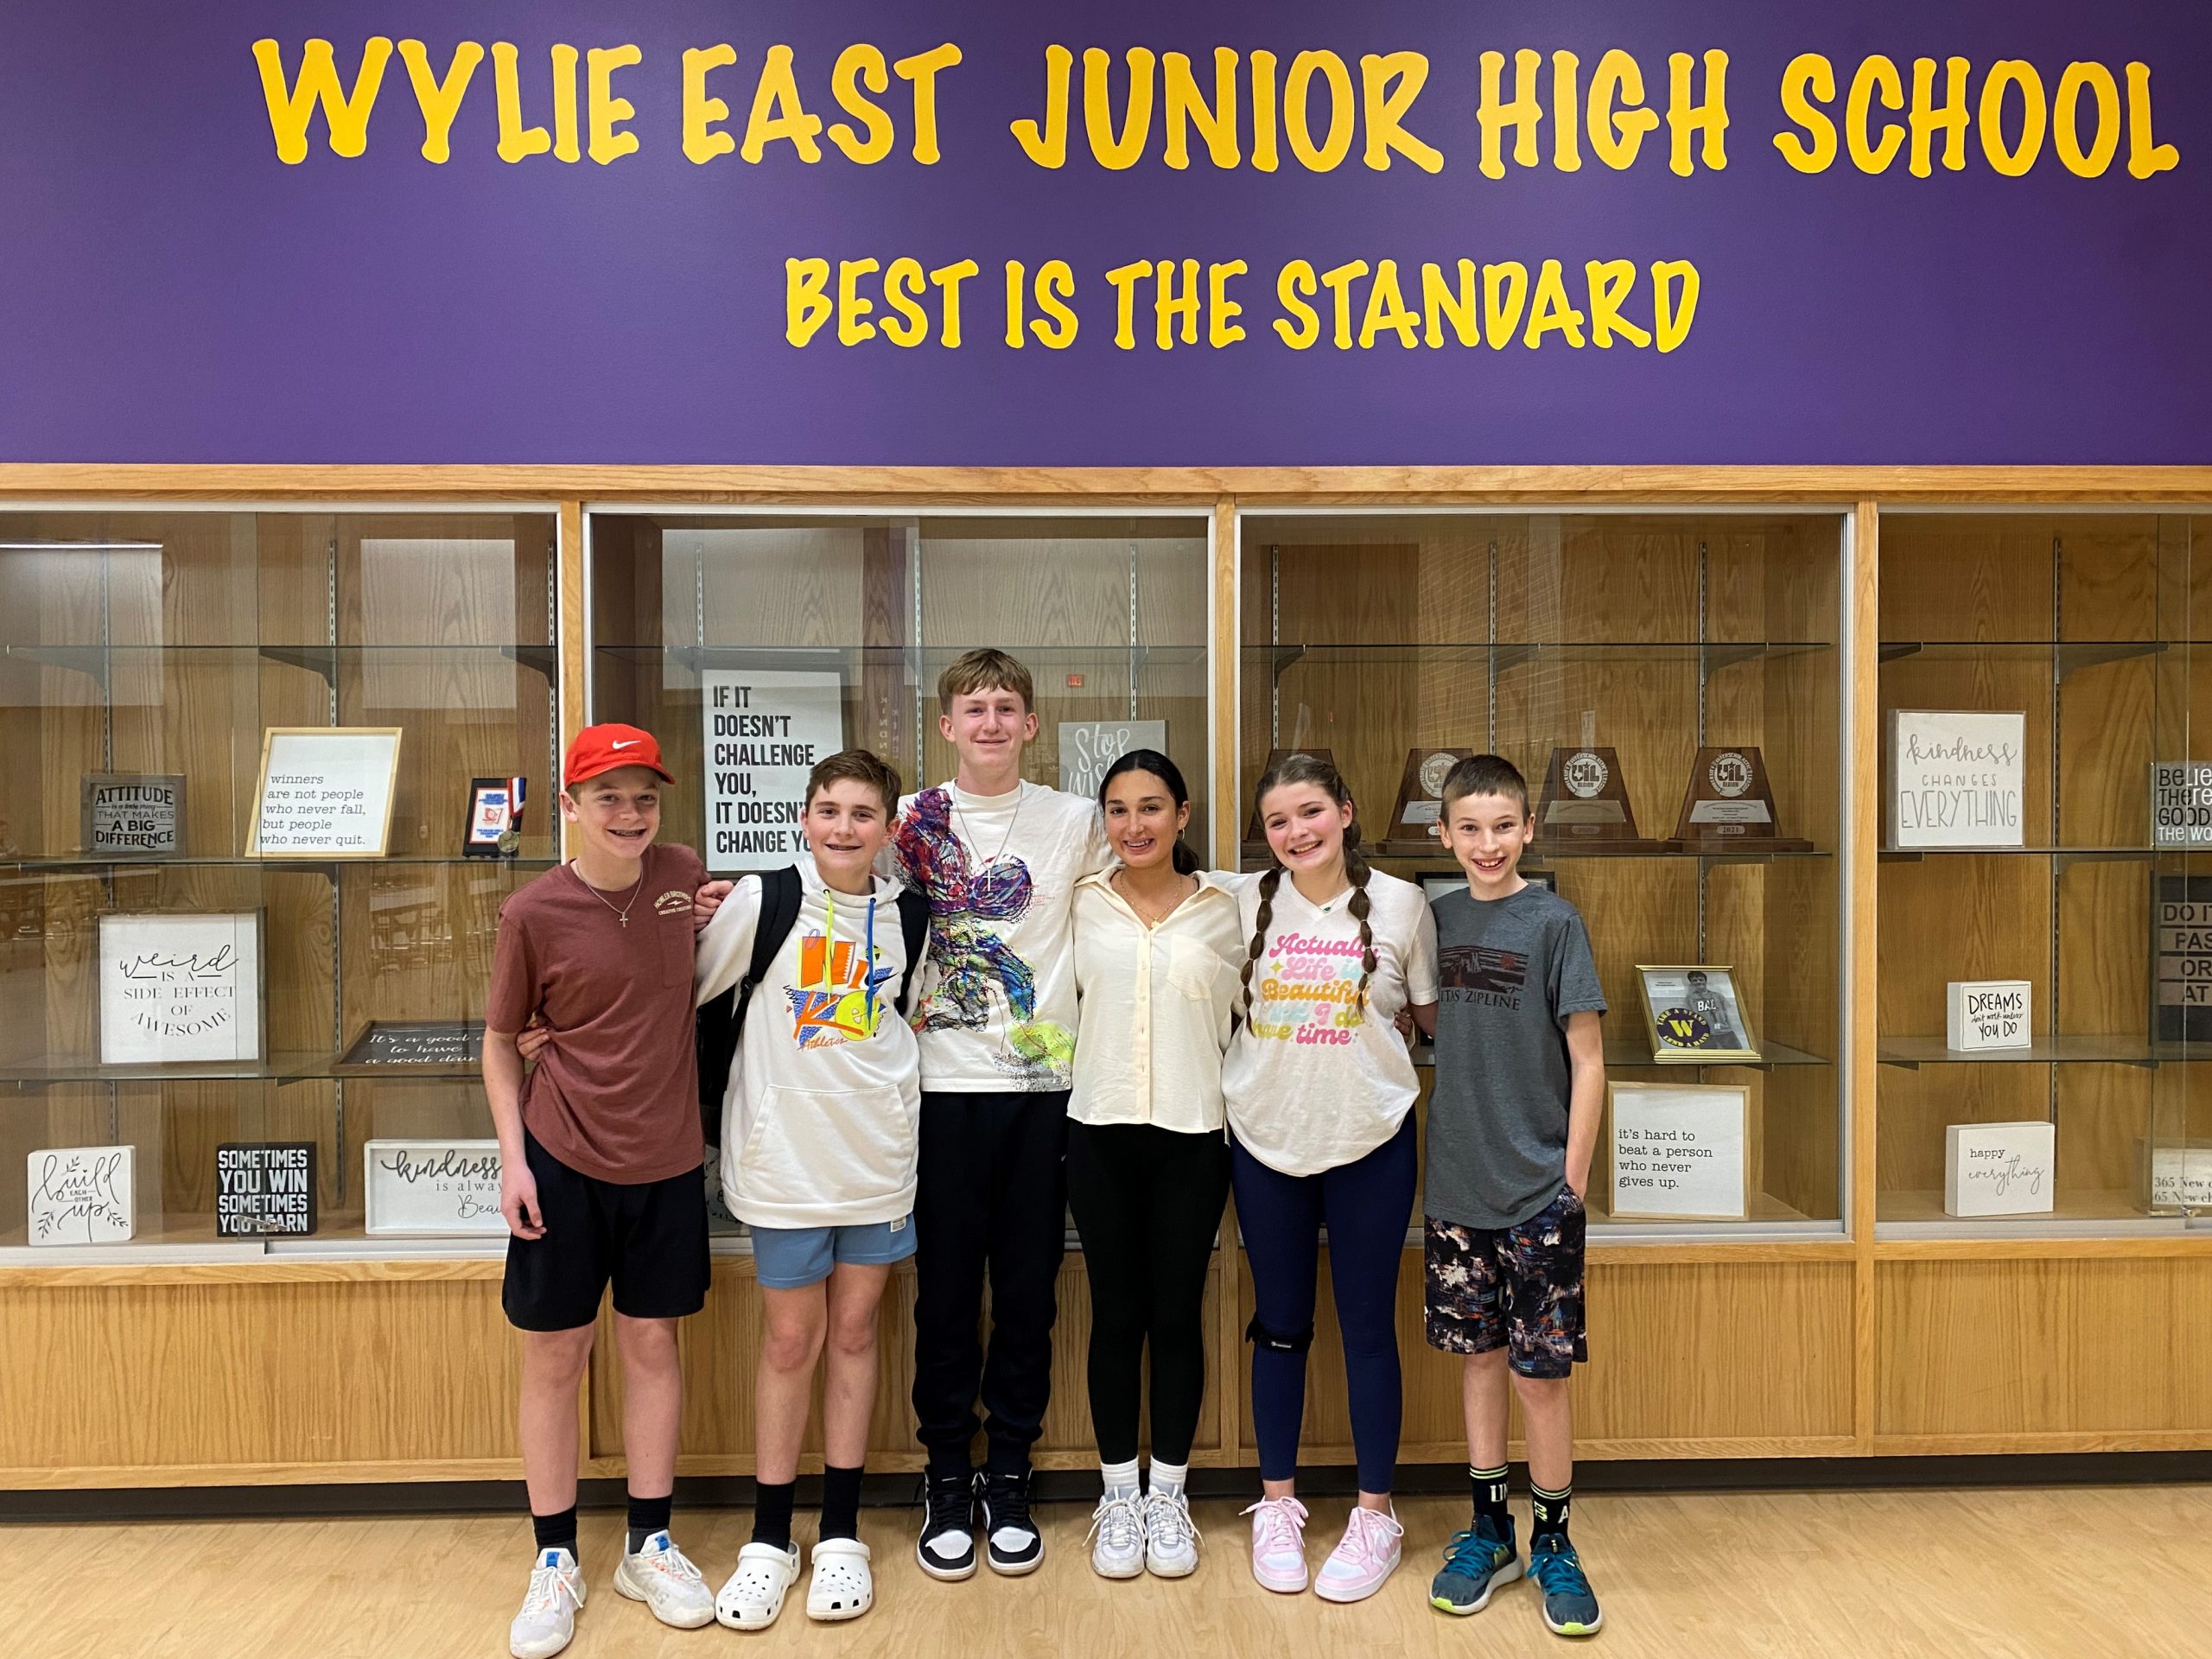 Wylie Students Motivated to Make a Difference for Their Peers - The Wylie Growl